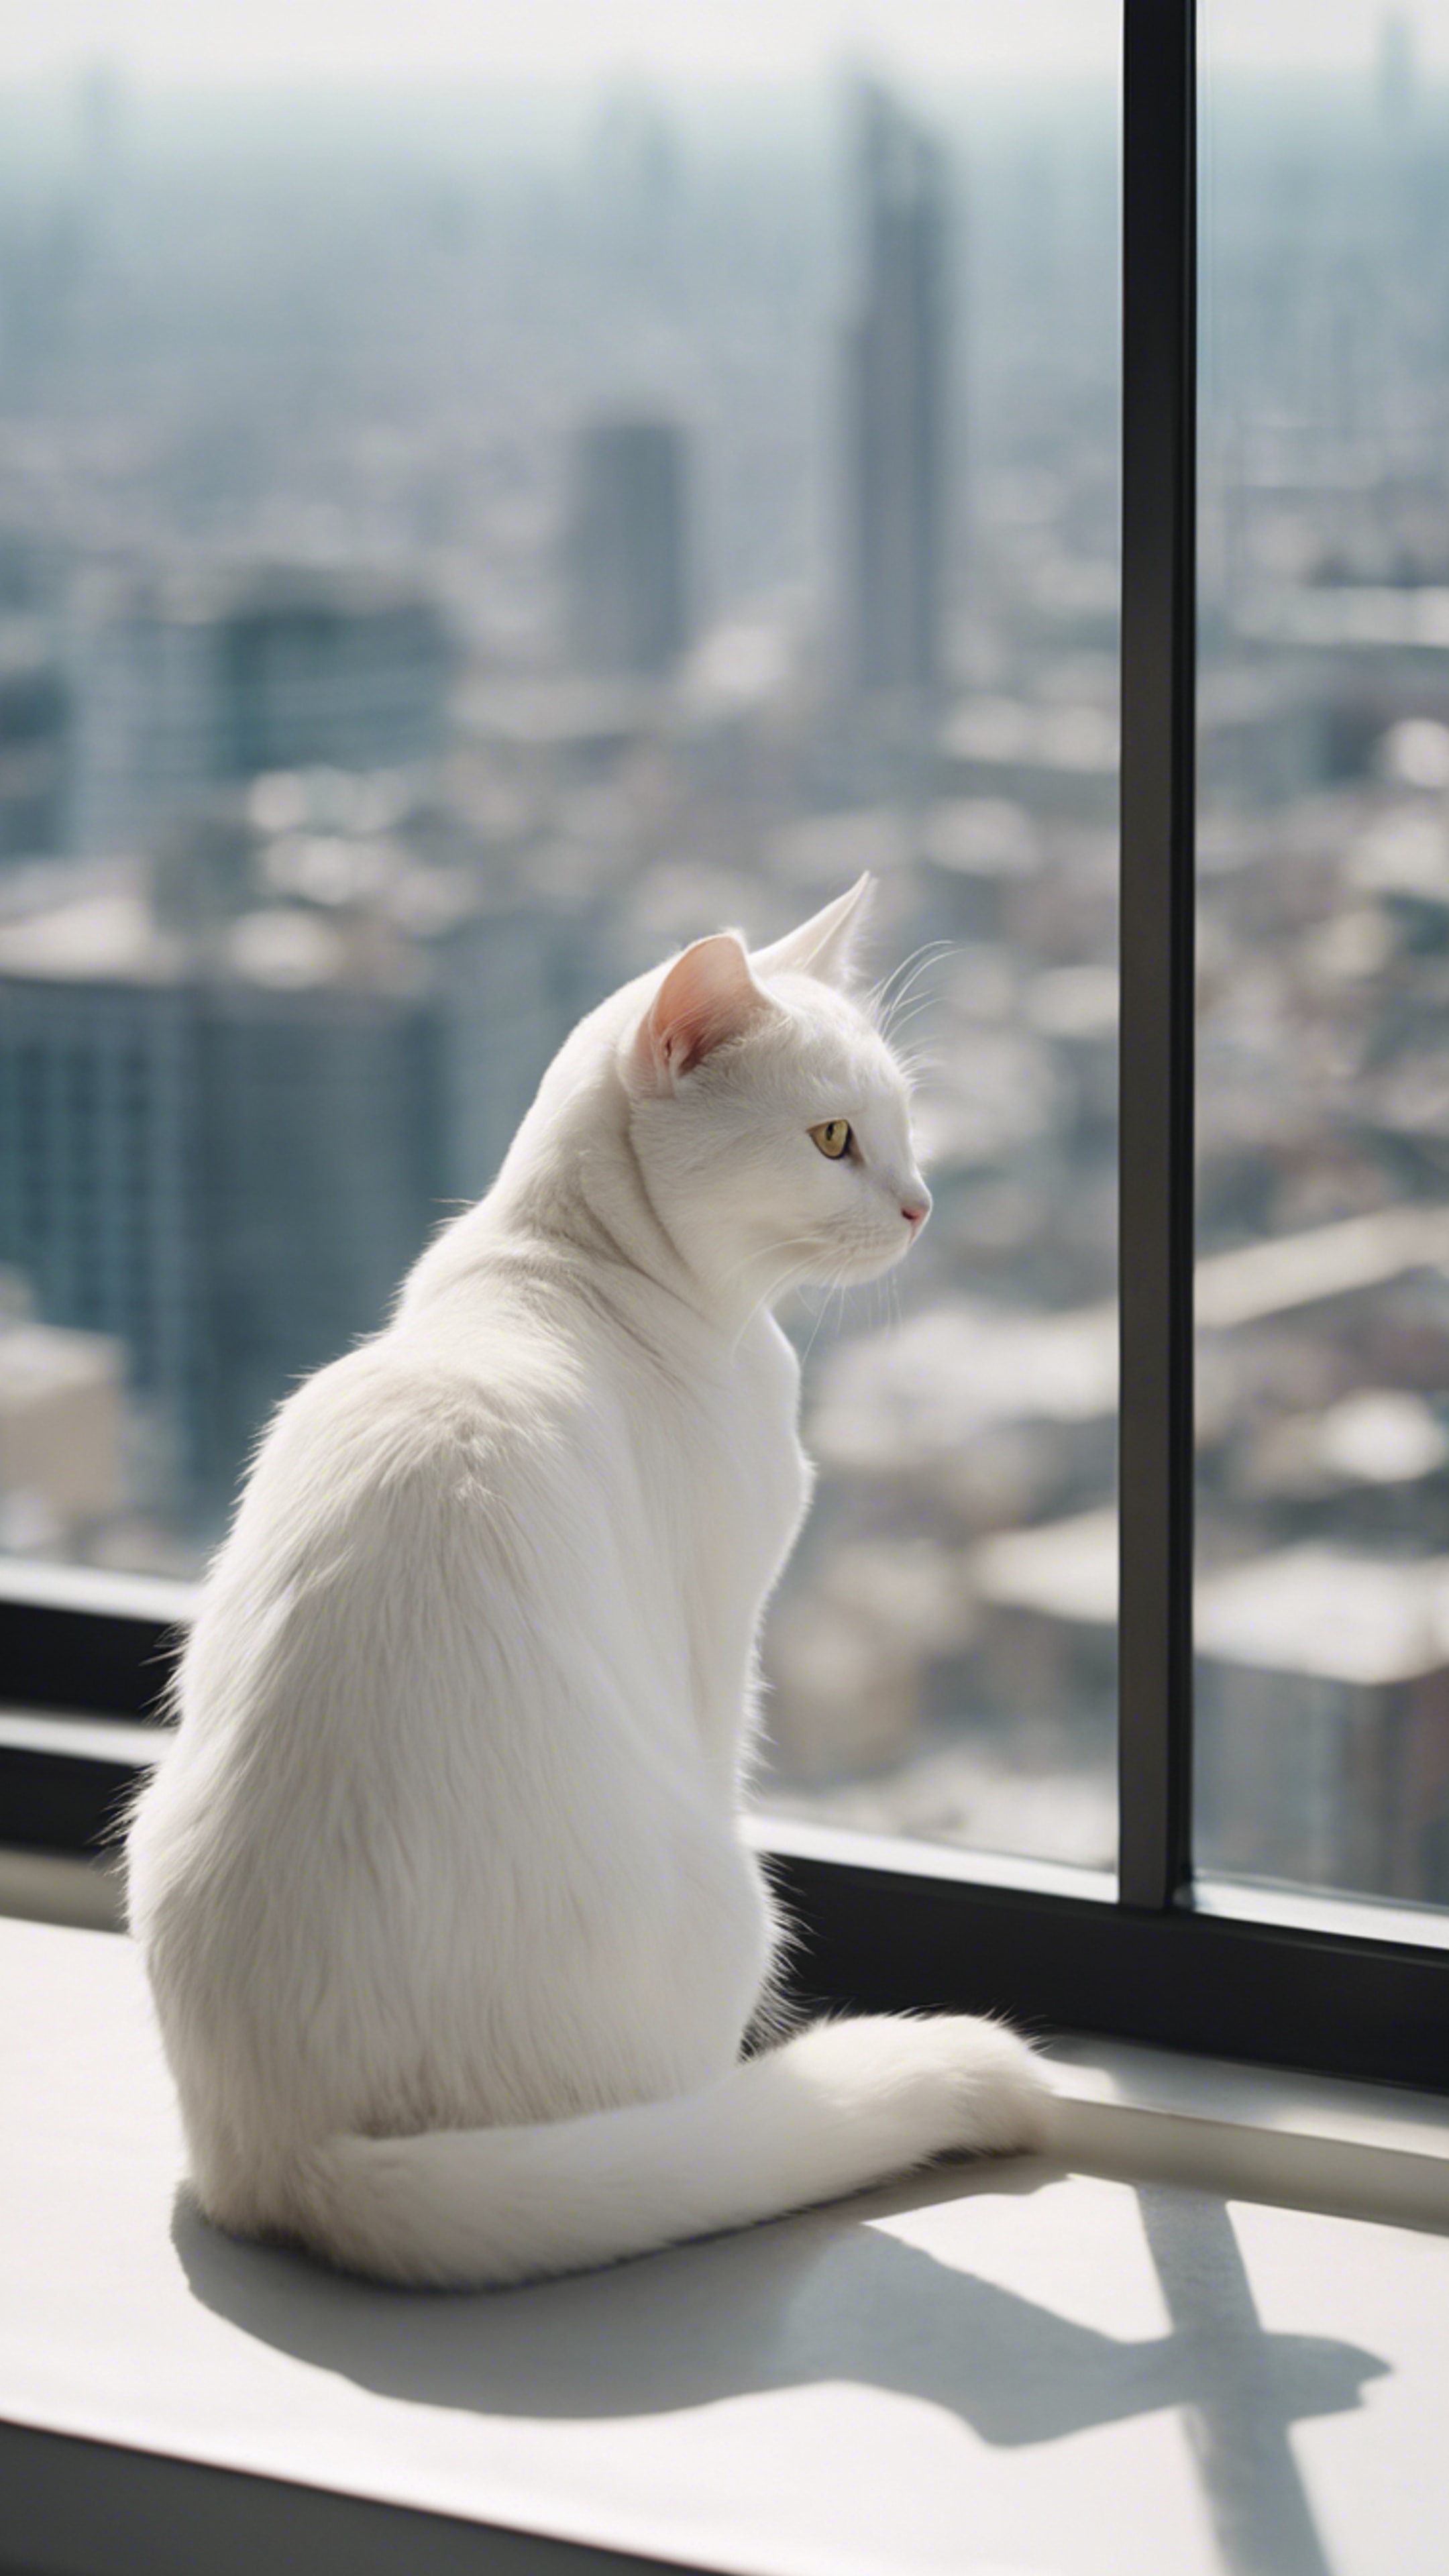 A white cat lying peacefully on a windowsill, admiring a city view from a skyscraper. Tapet[751c381e97644d32a2eb]